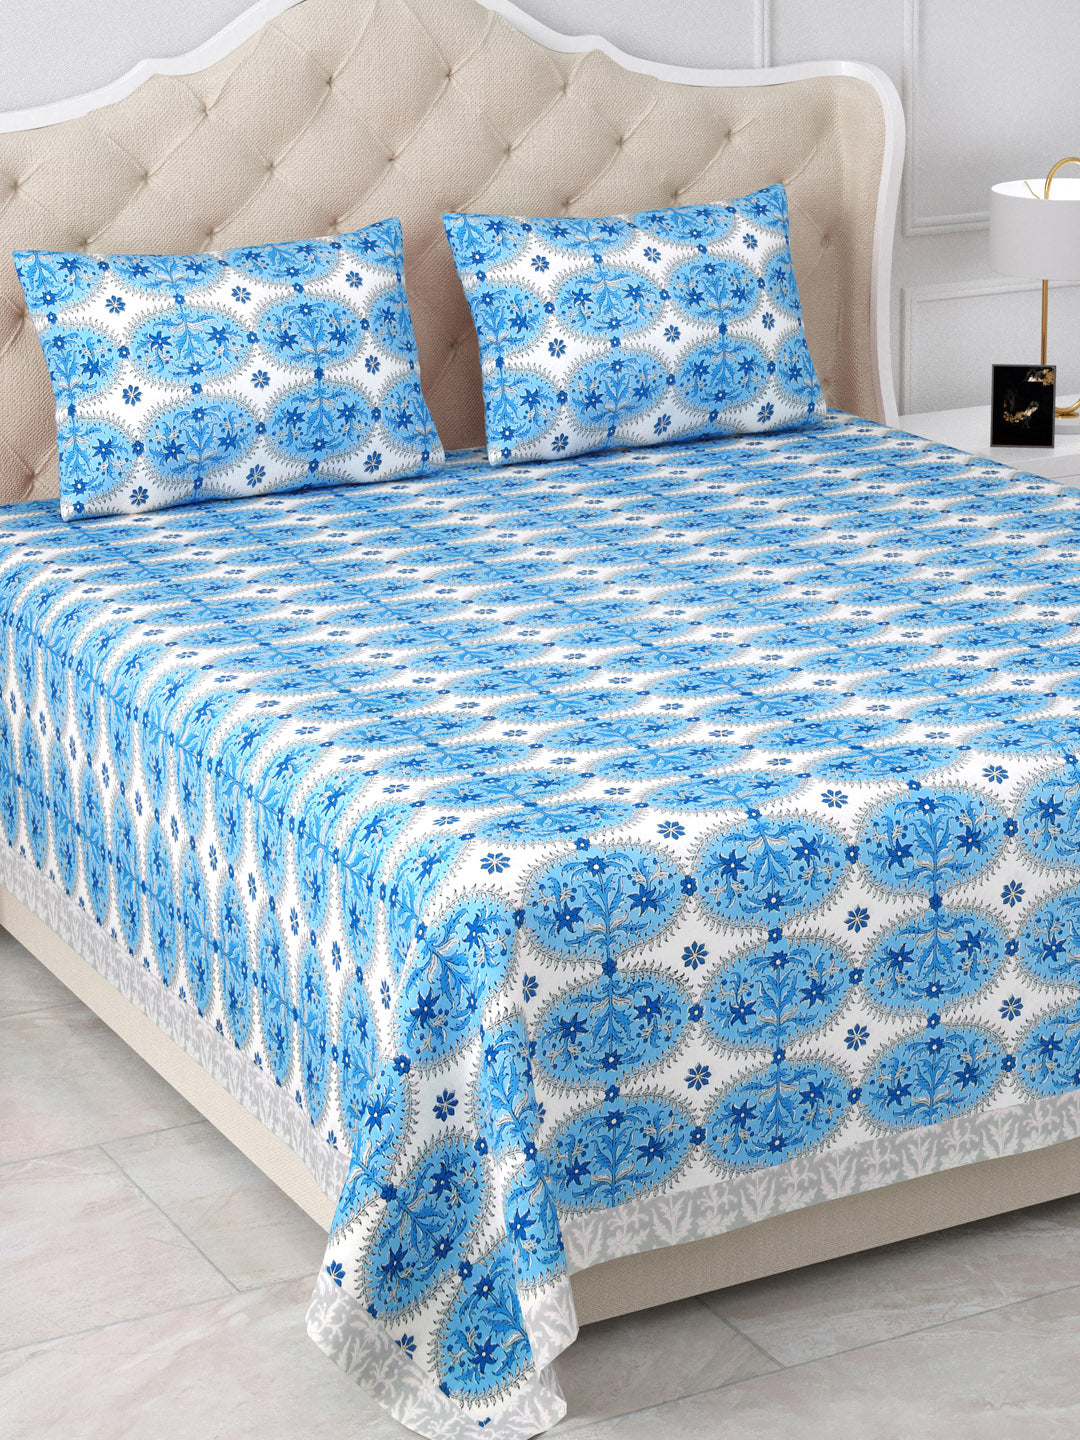 Jaipur Blue Pottery Mosaic Cotton Double Bedsheet with 2 Pillow Covers